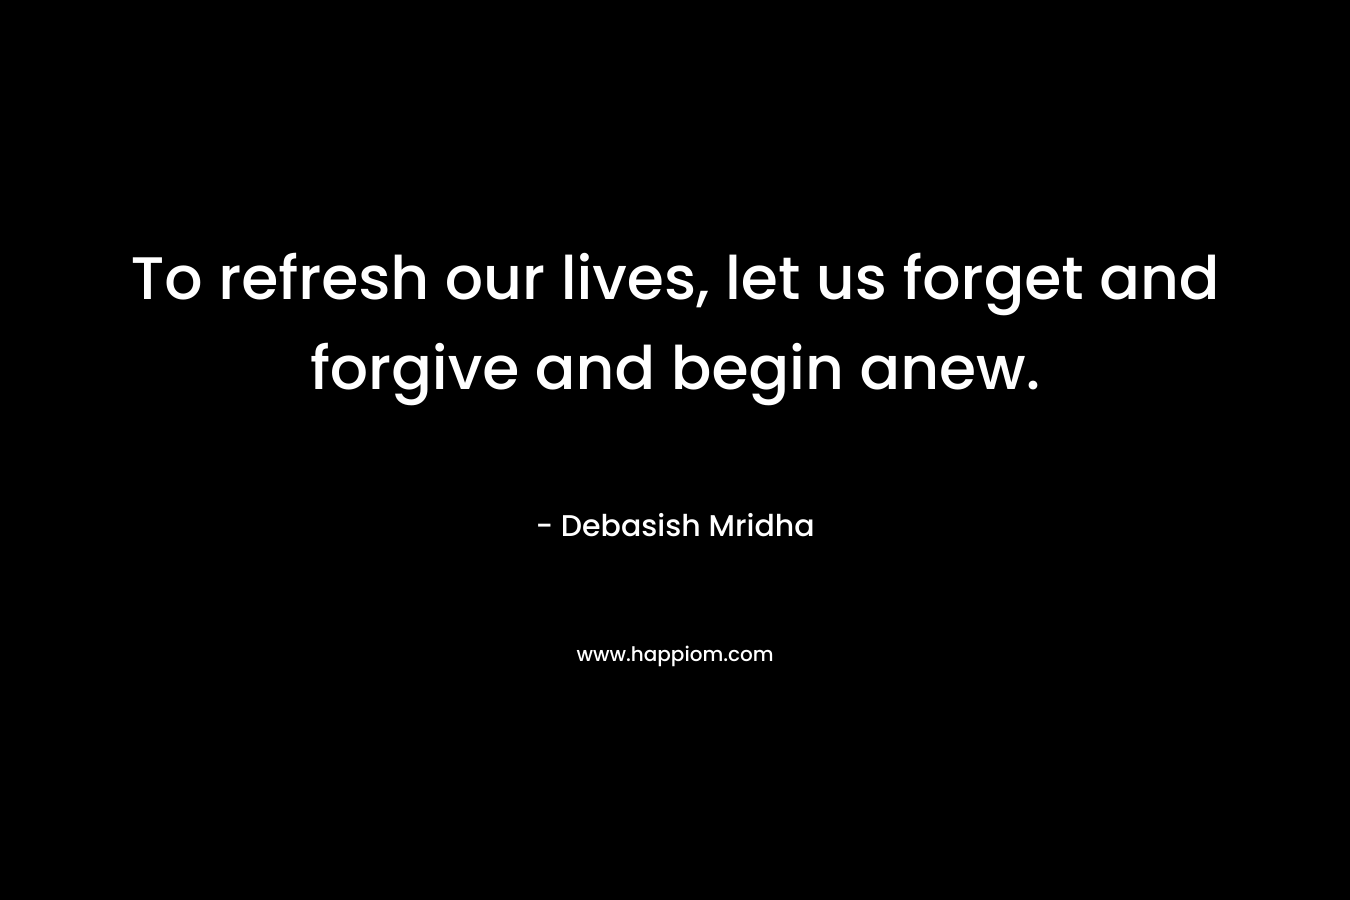 To refresh our lives, let us forget and forgive and begin anew.